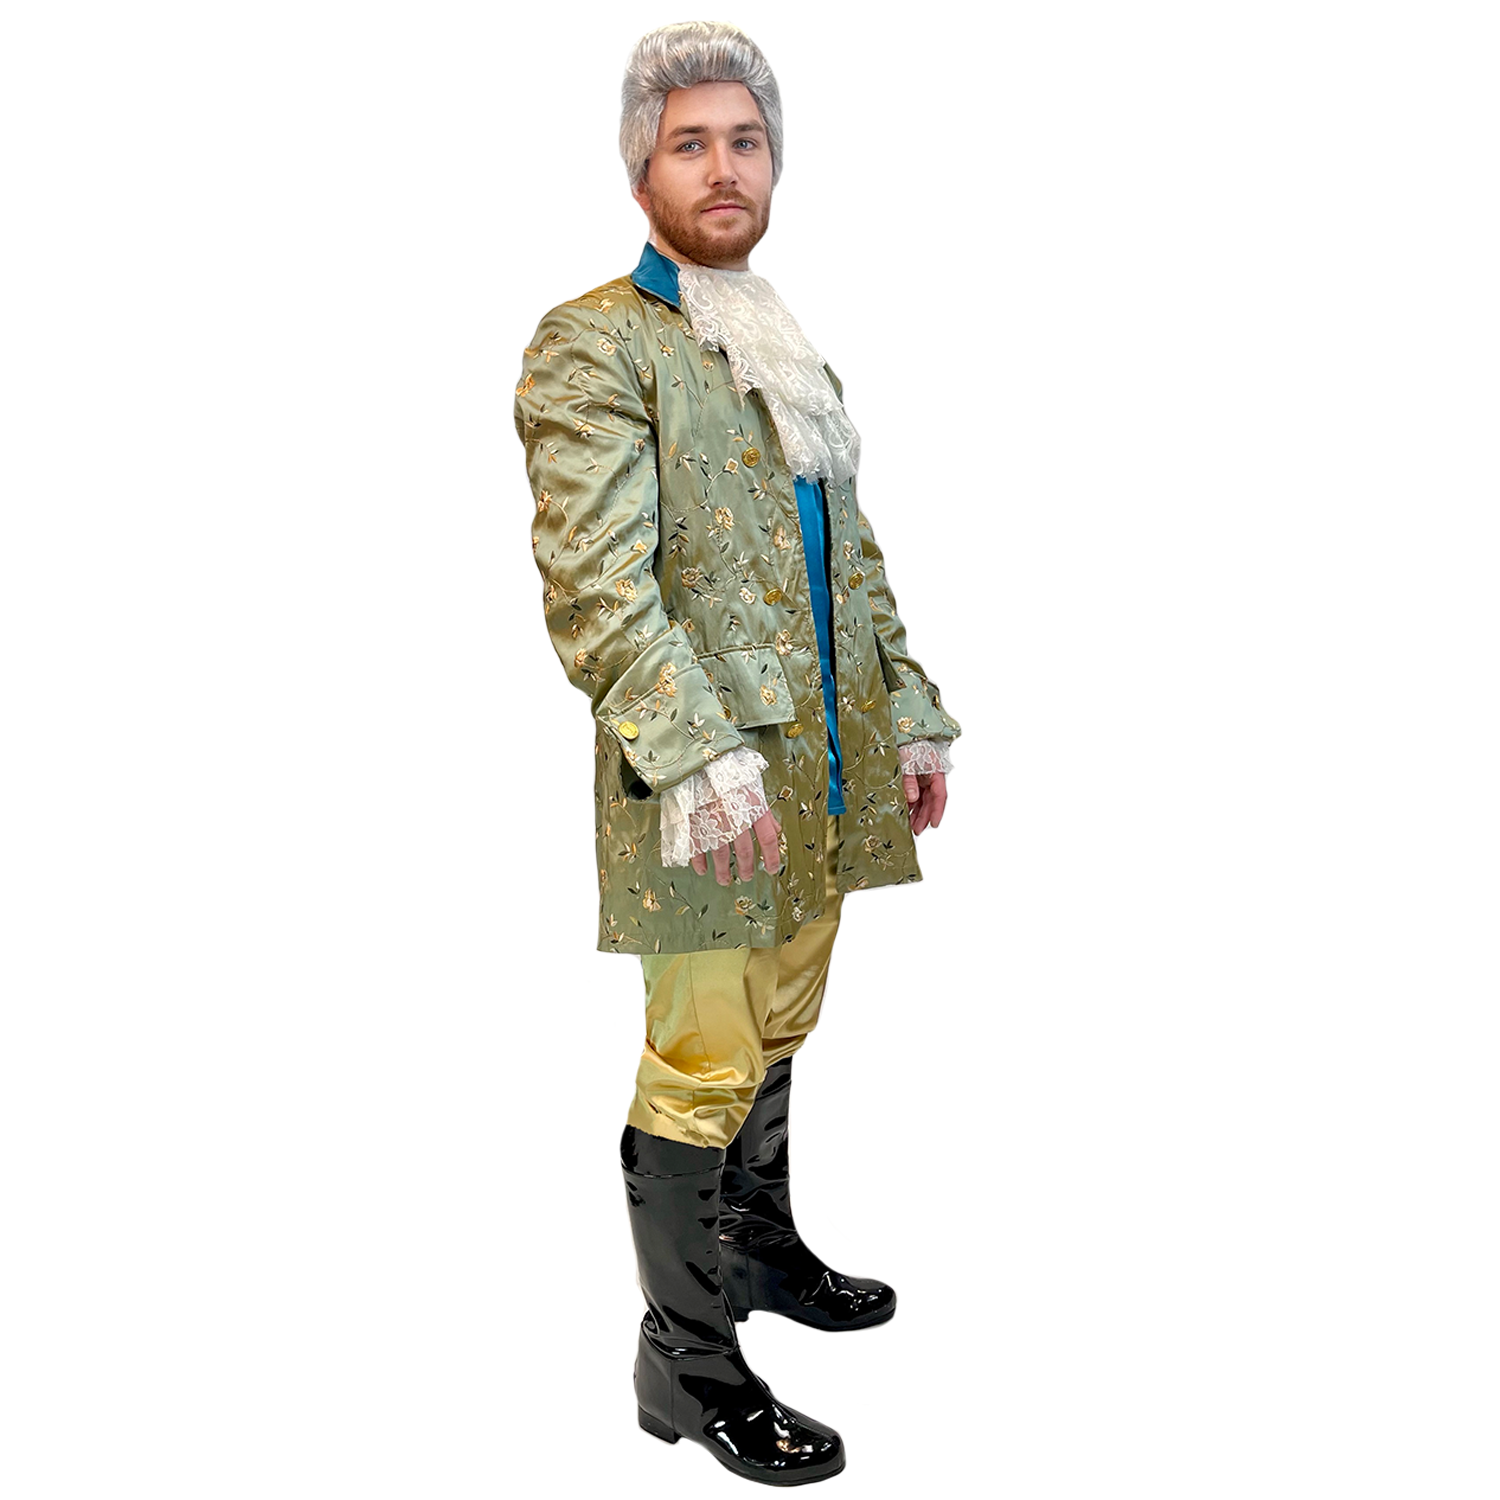 Deluxe Colonial Edward III Adult Costume